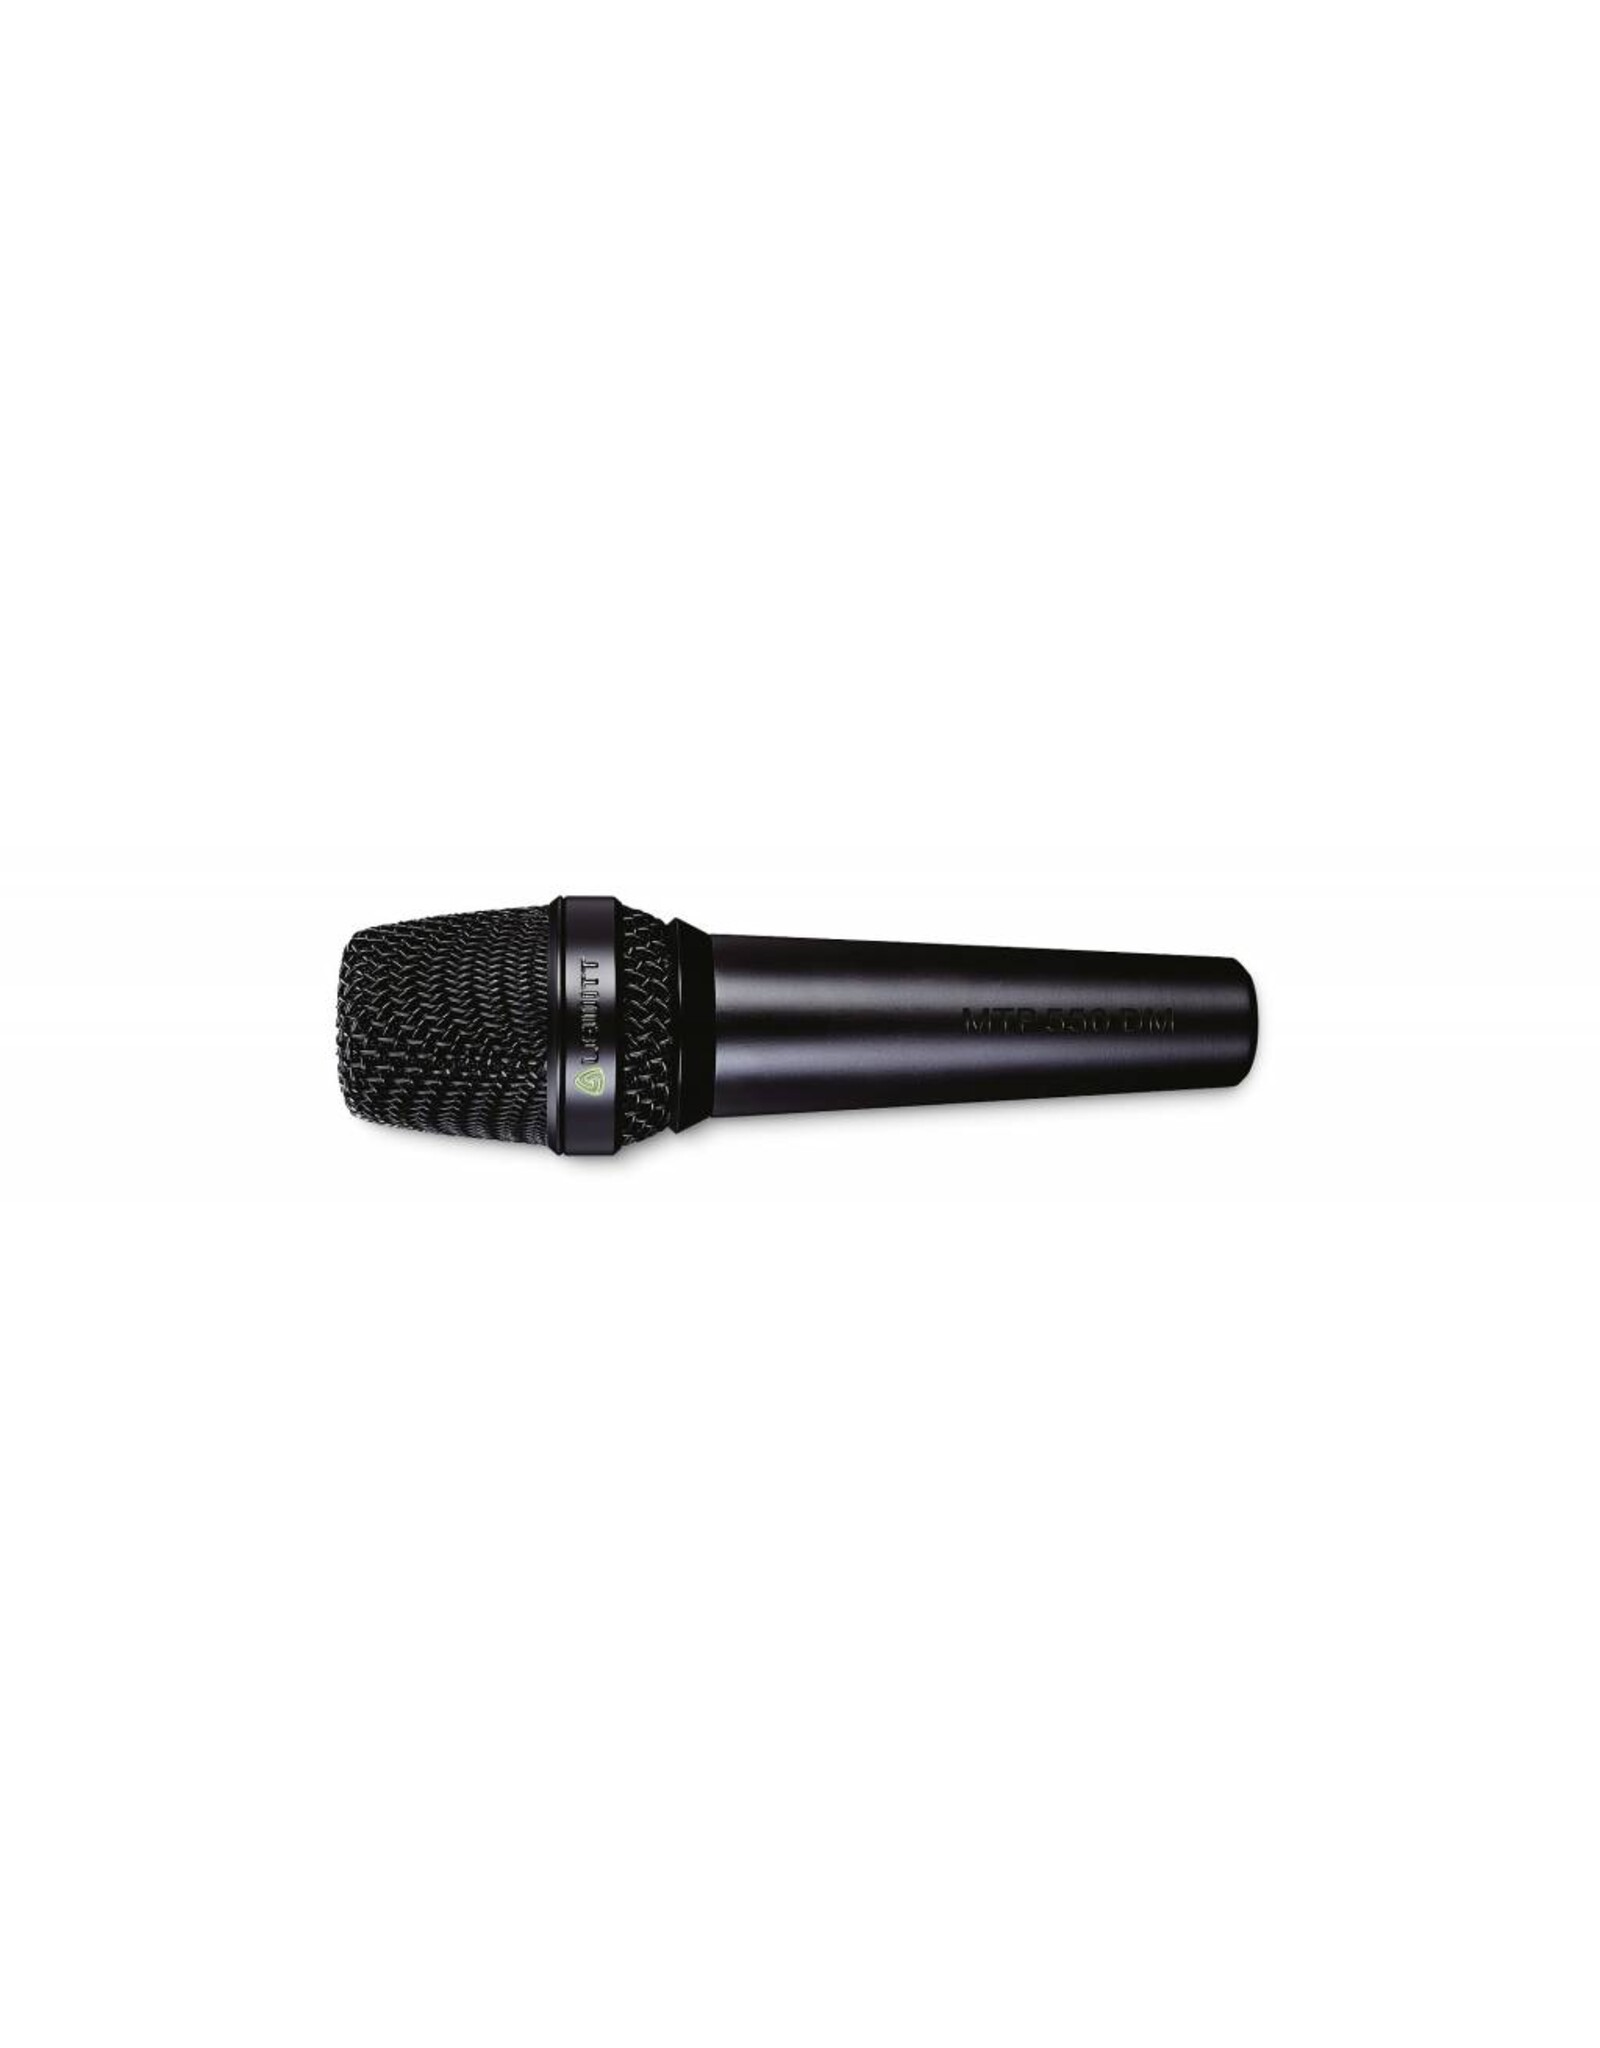 Lewitt MTP550DMS Vocal Microphone with switch